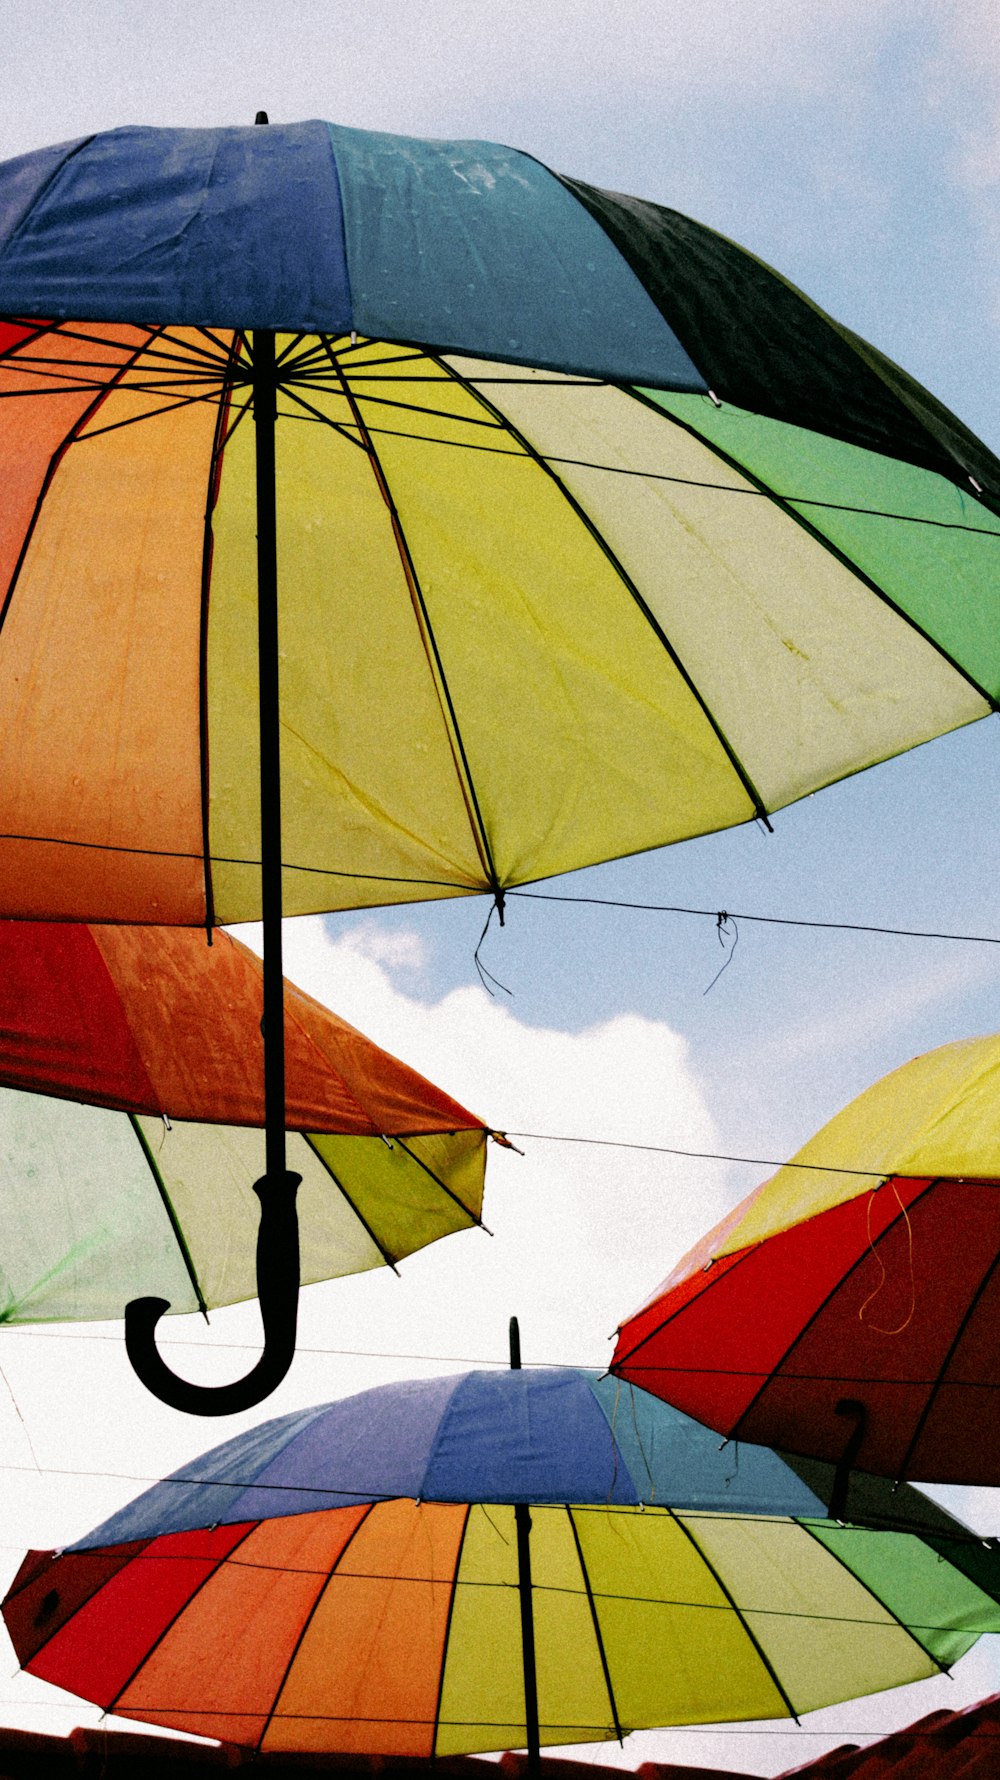 a group of multicolored umbrellas hanging in the air